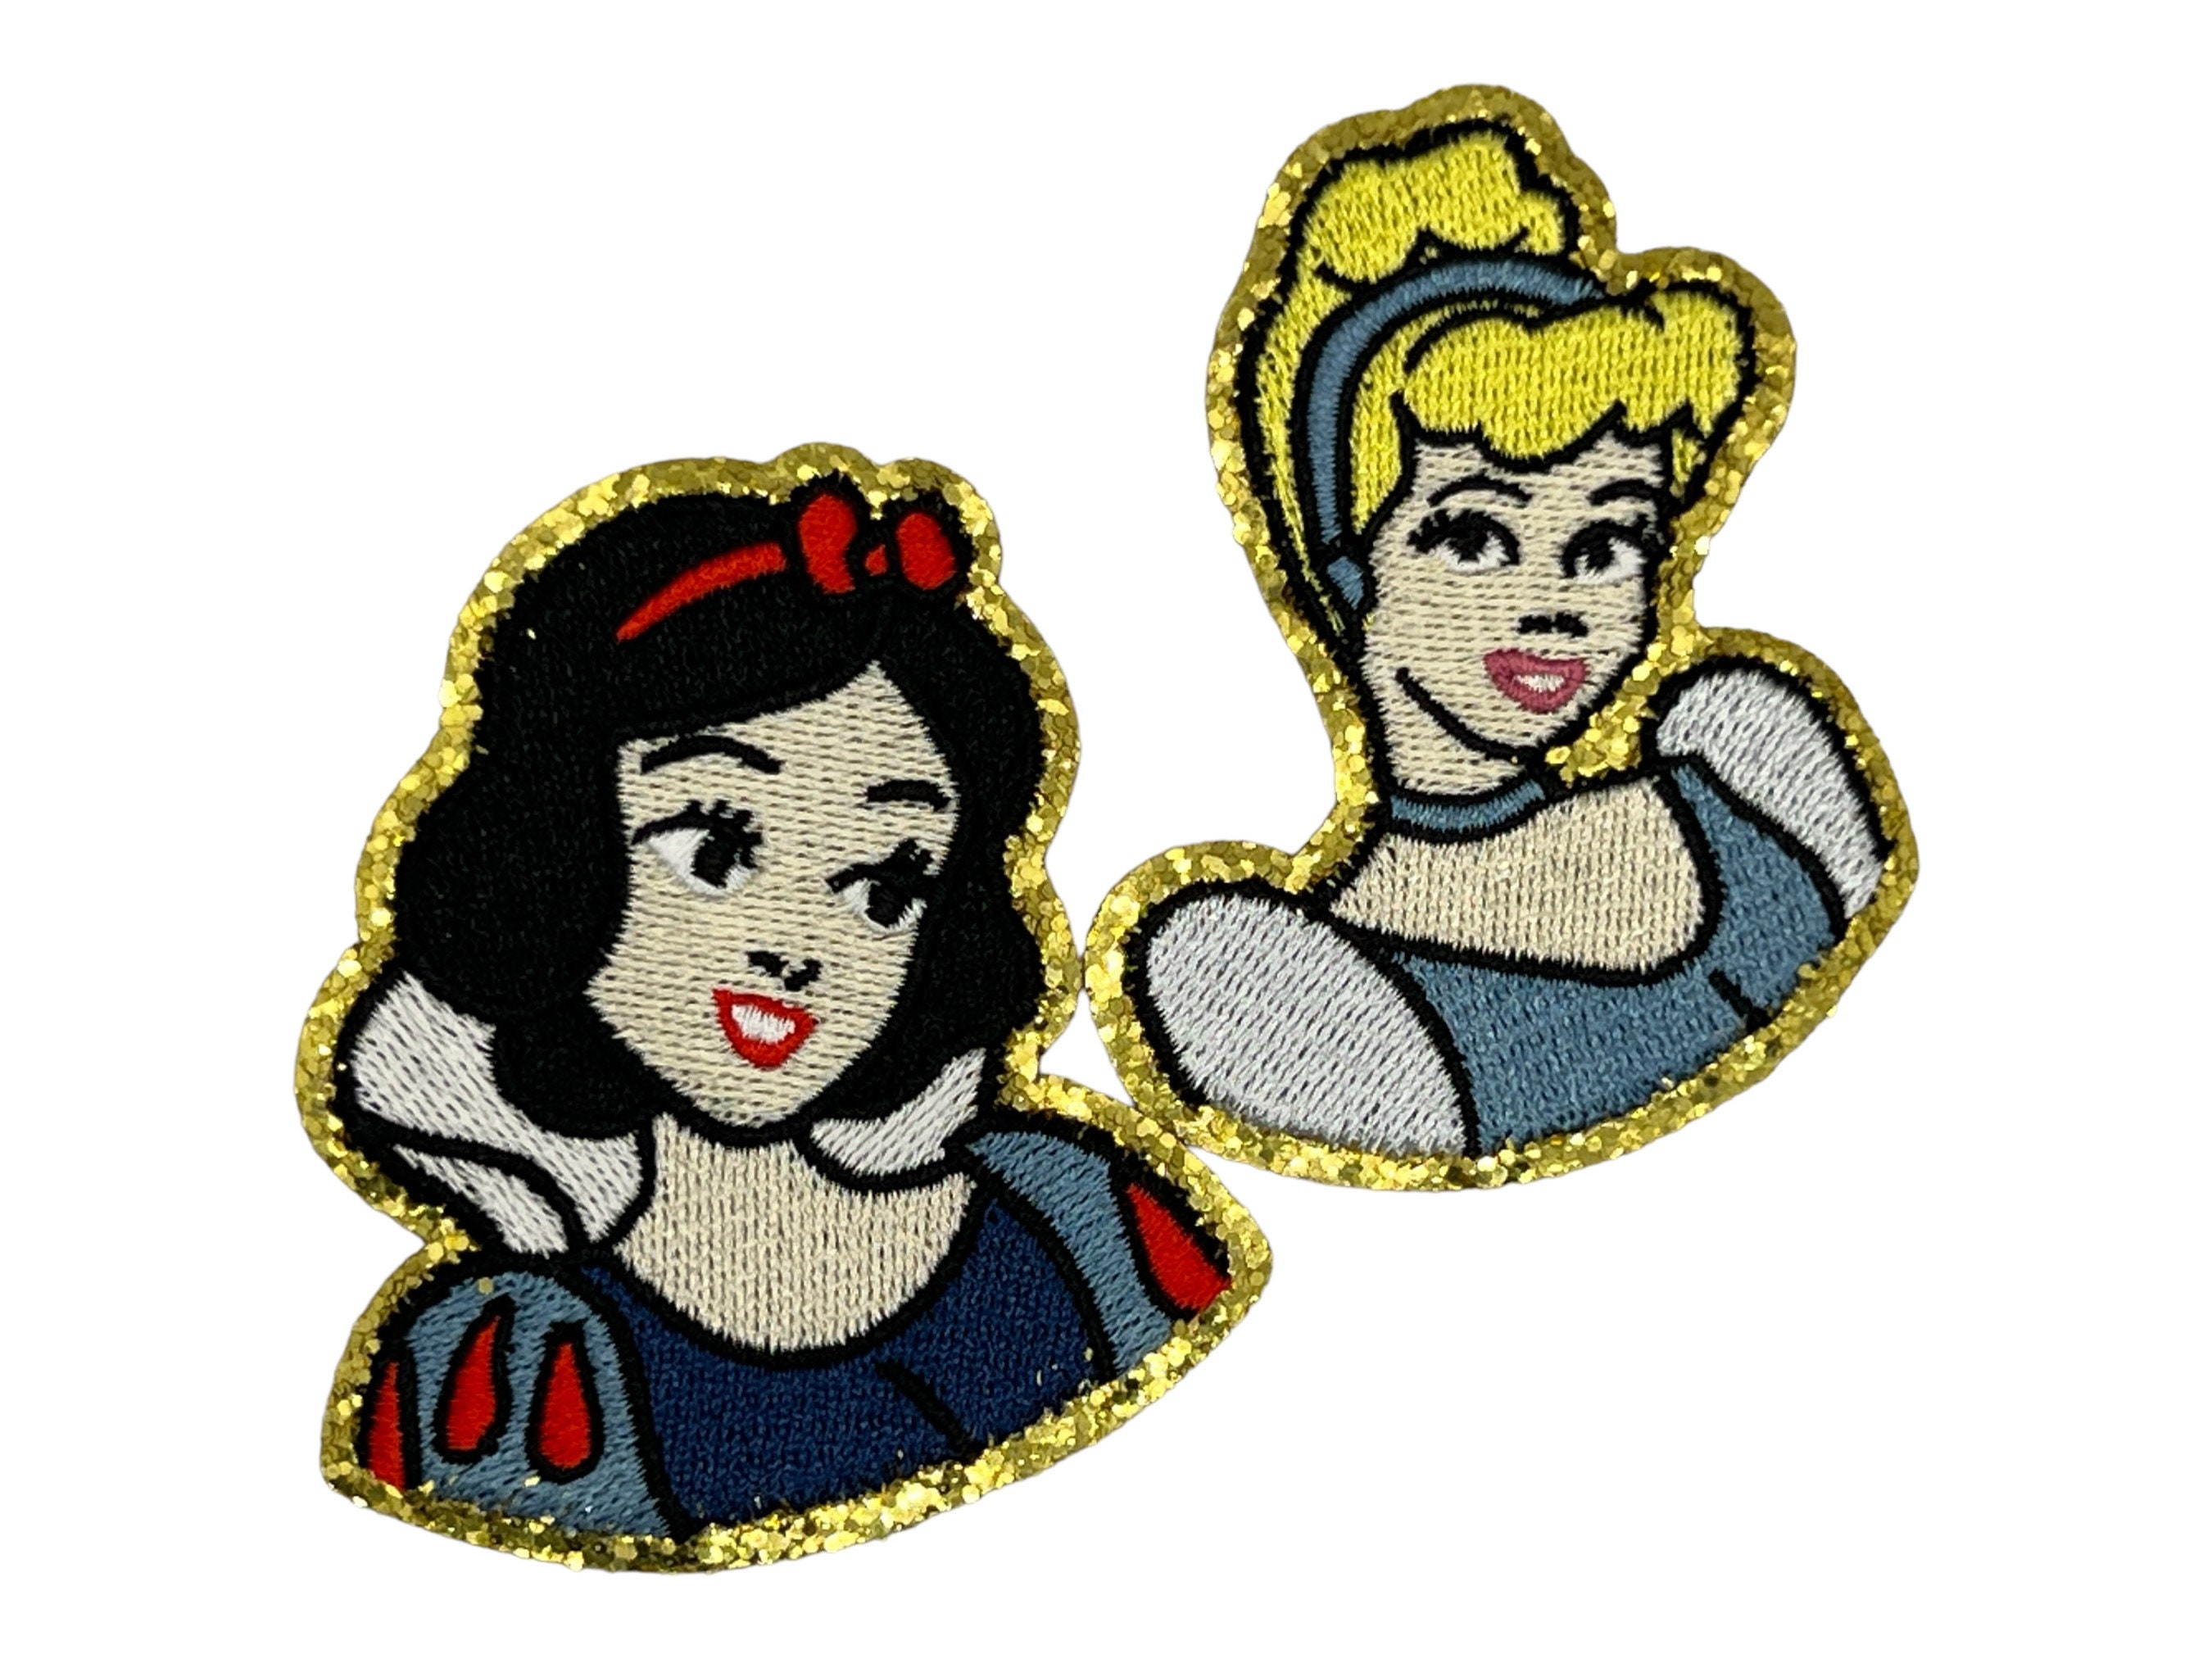 Disney iron on patches, embroidered Snow White Patch Seven Dwarfs Patch